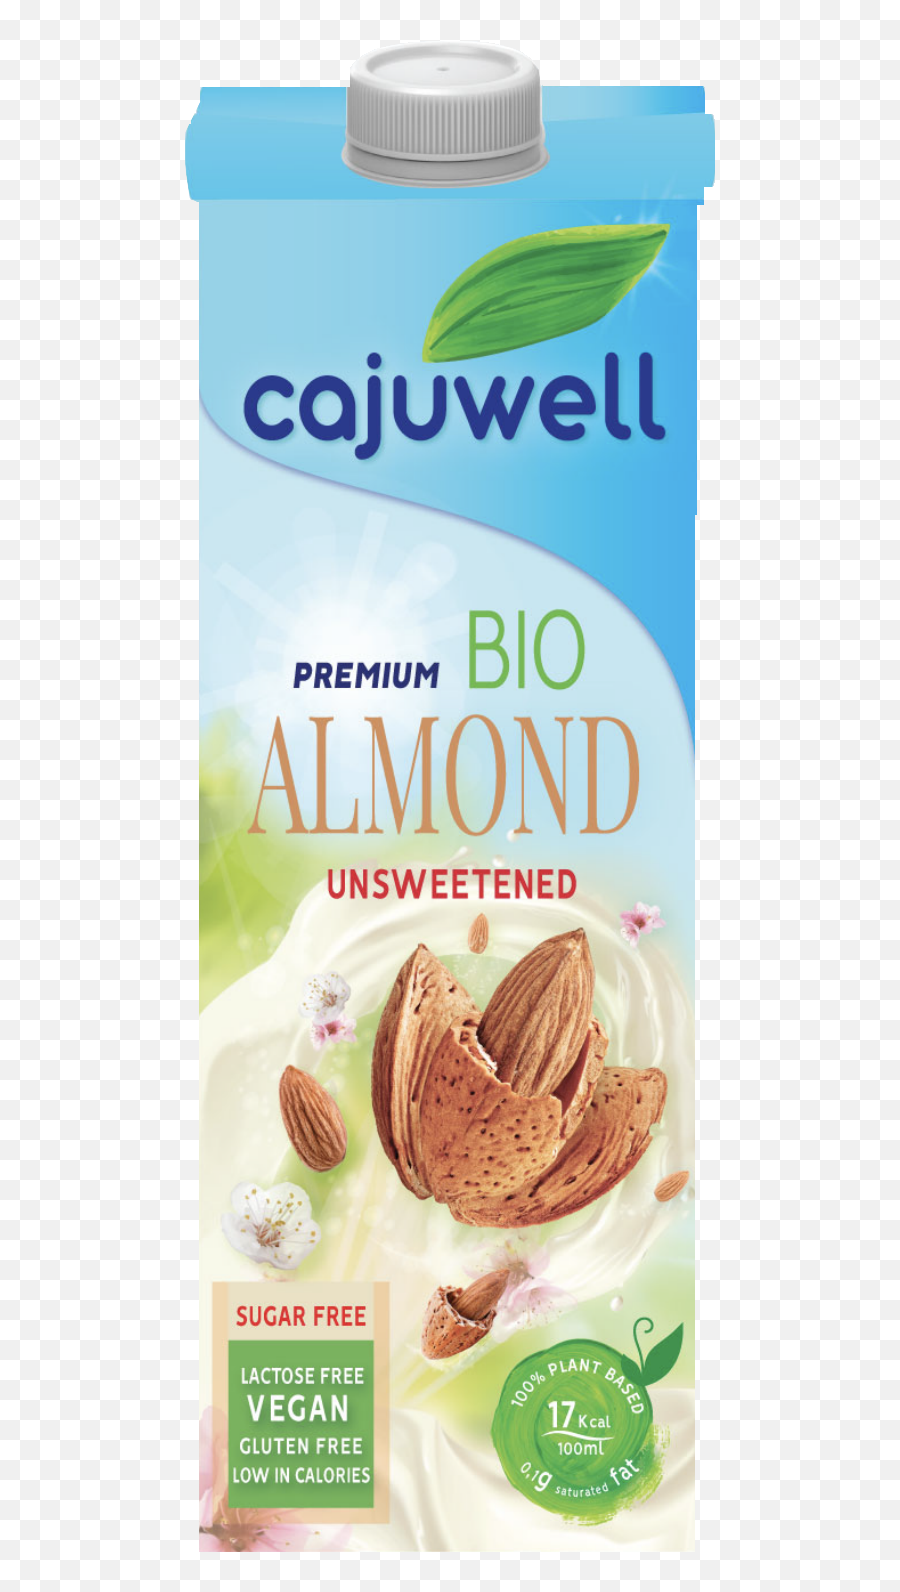 Cajuwell Bio Almond - Superfood Png,Almond Png